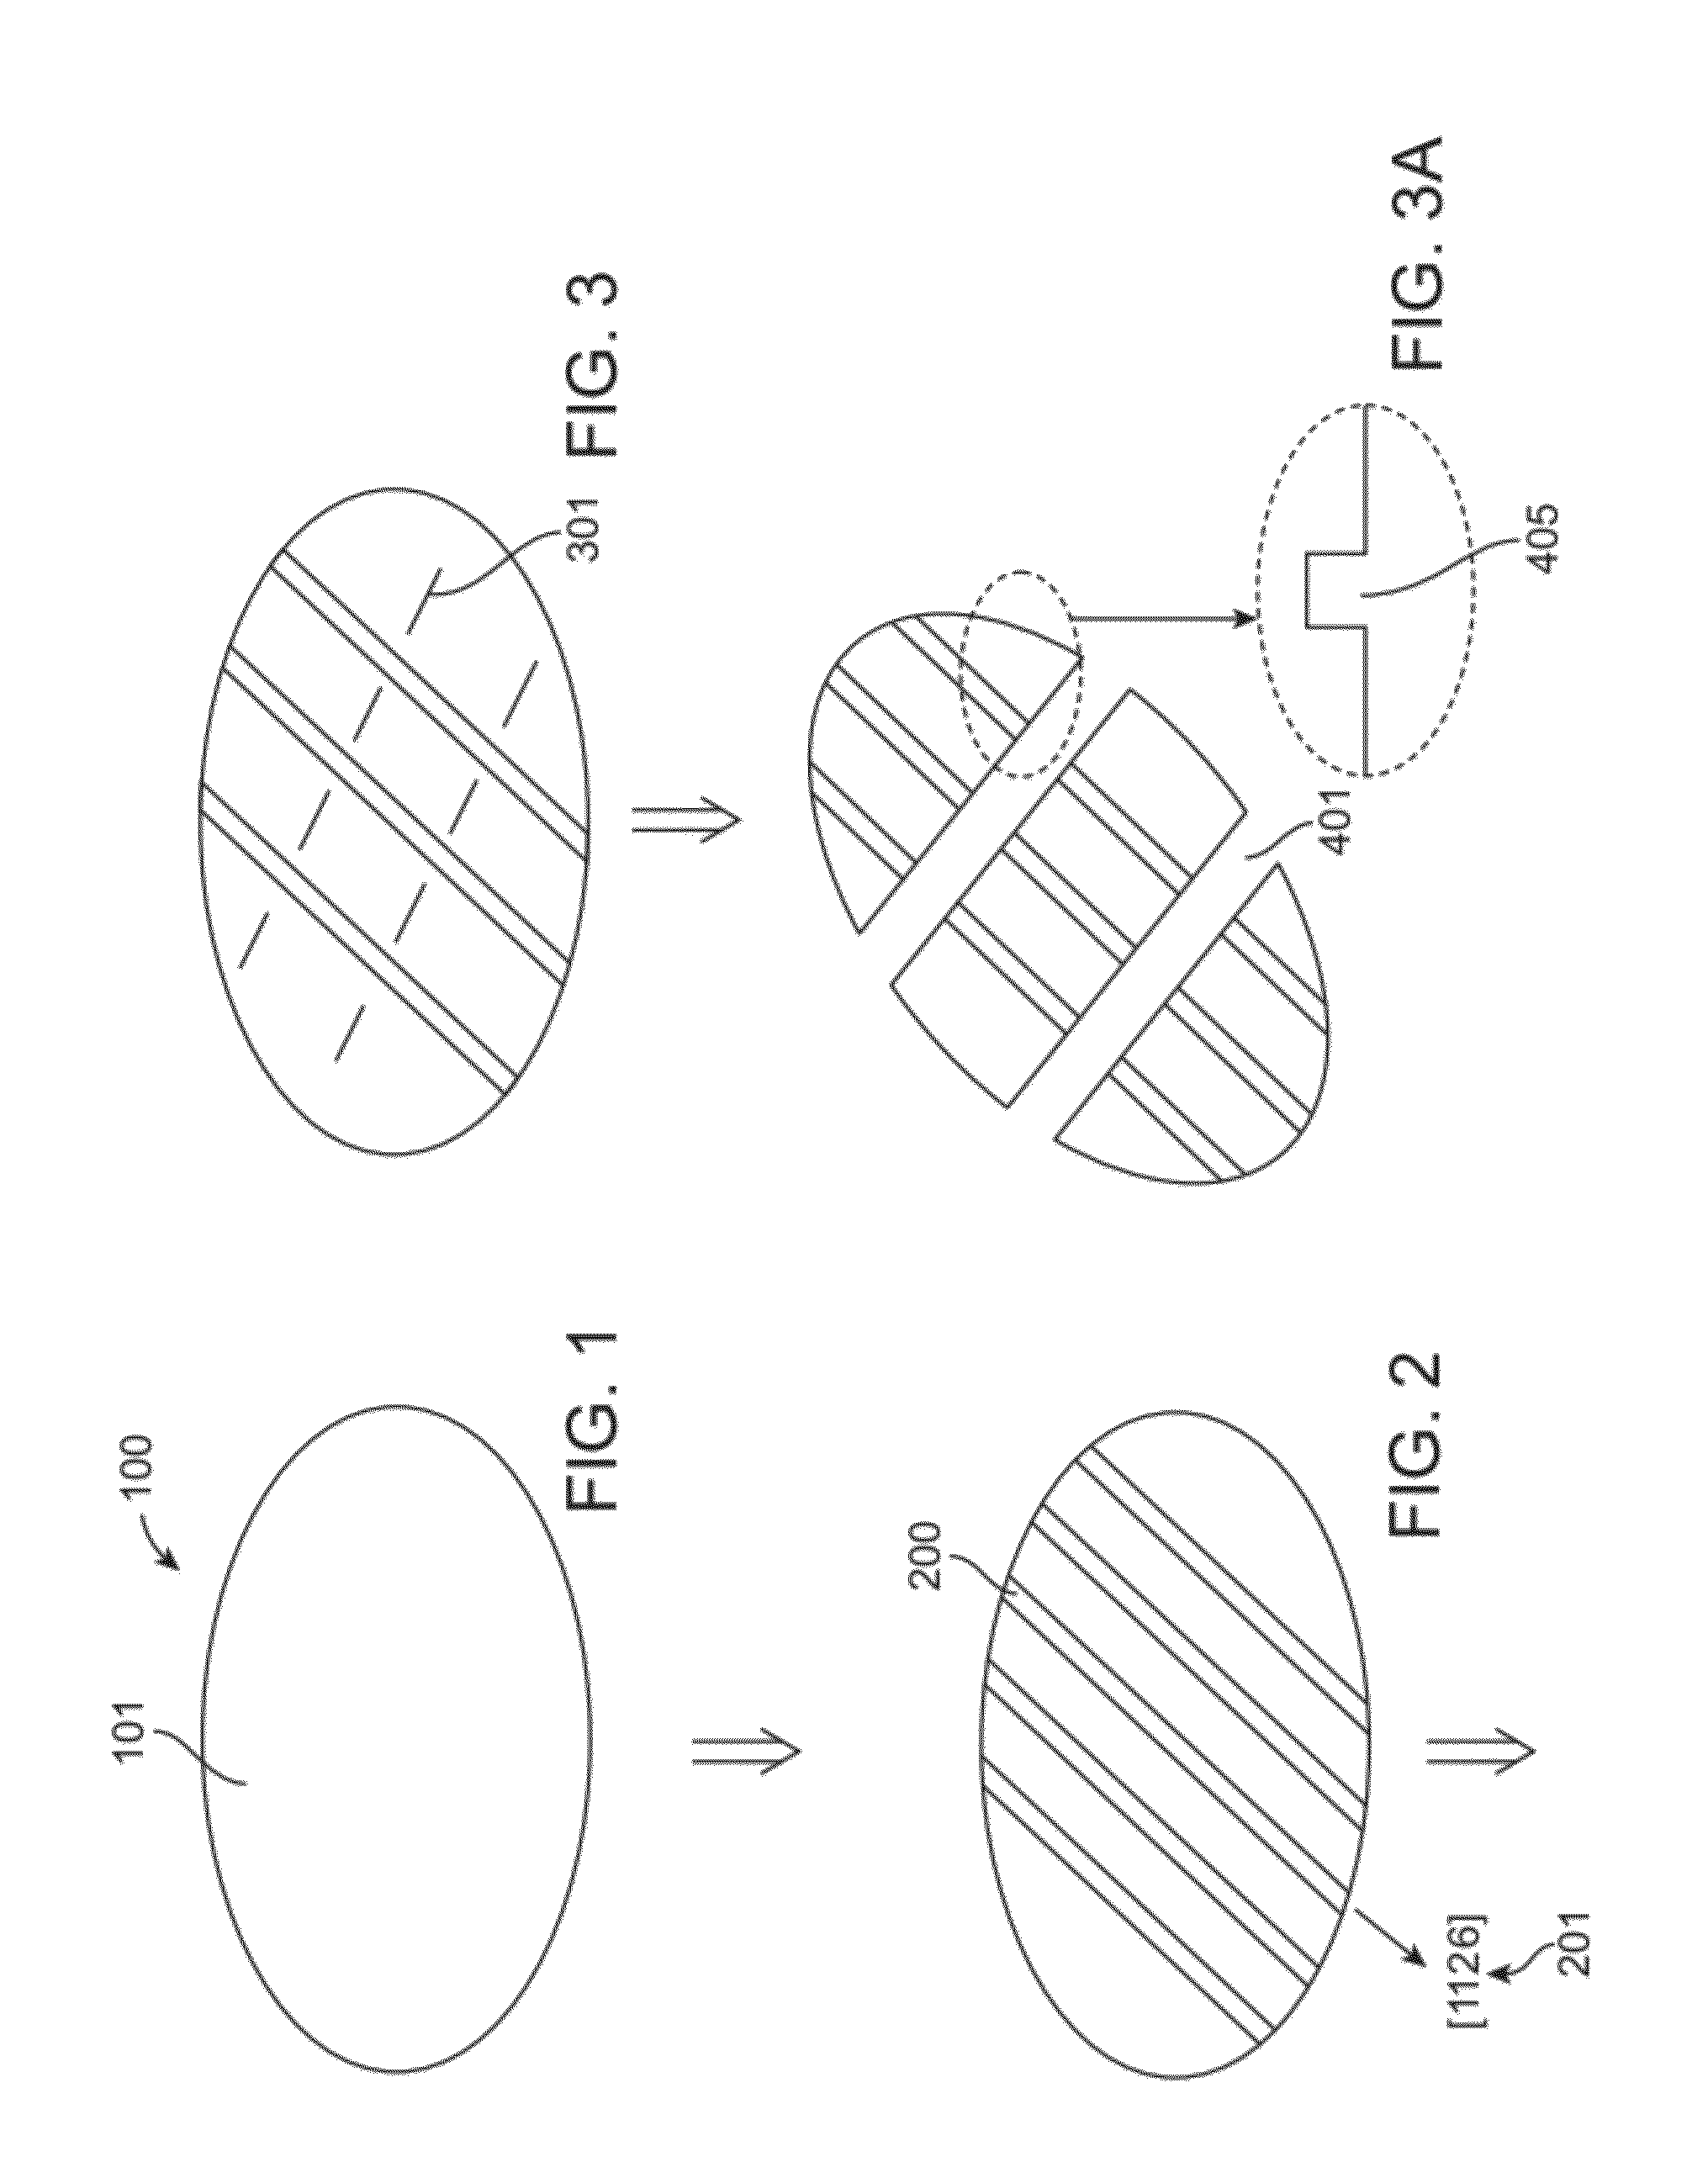 Solid state laser device using a selected crystal orientation in non-polar or semi-polar GaN containing materials and methods